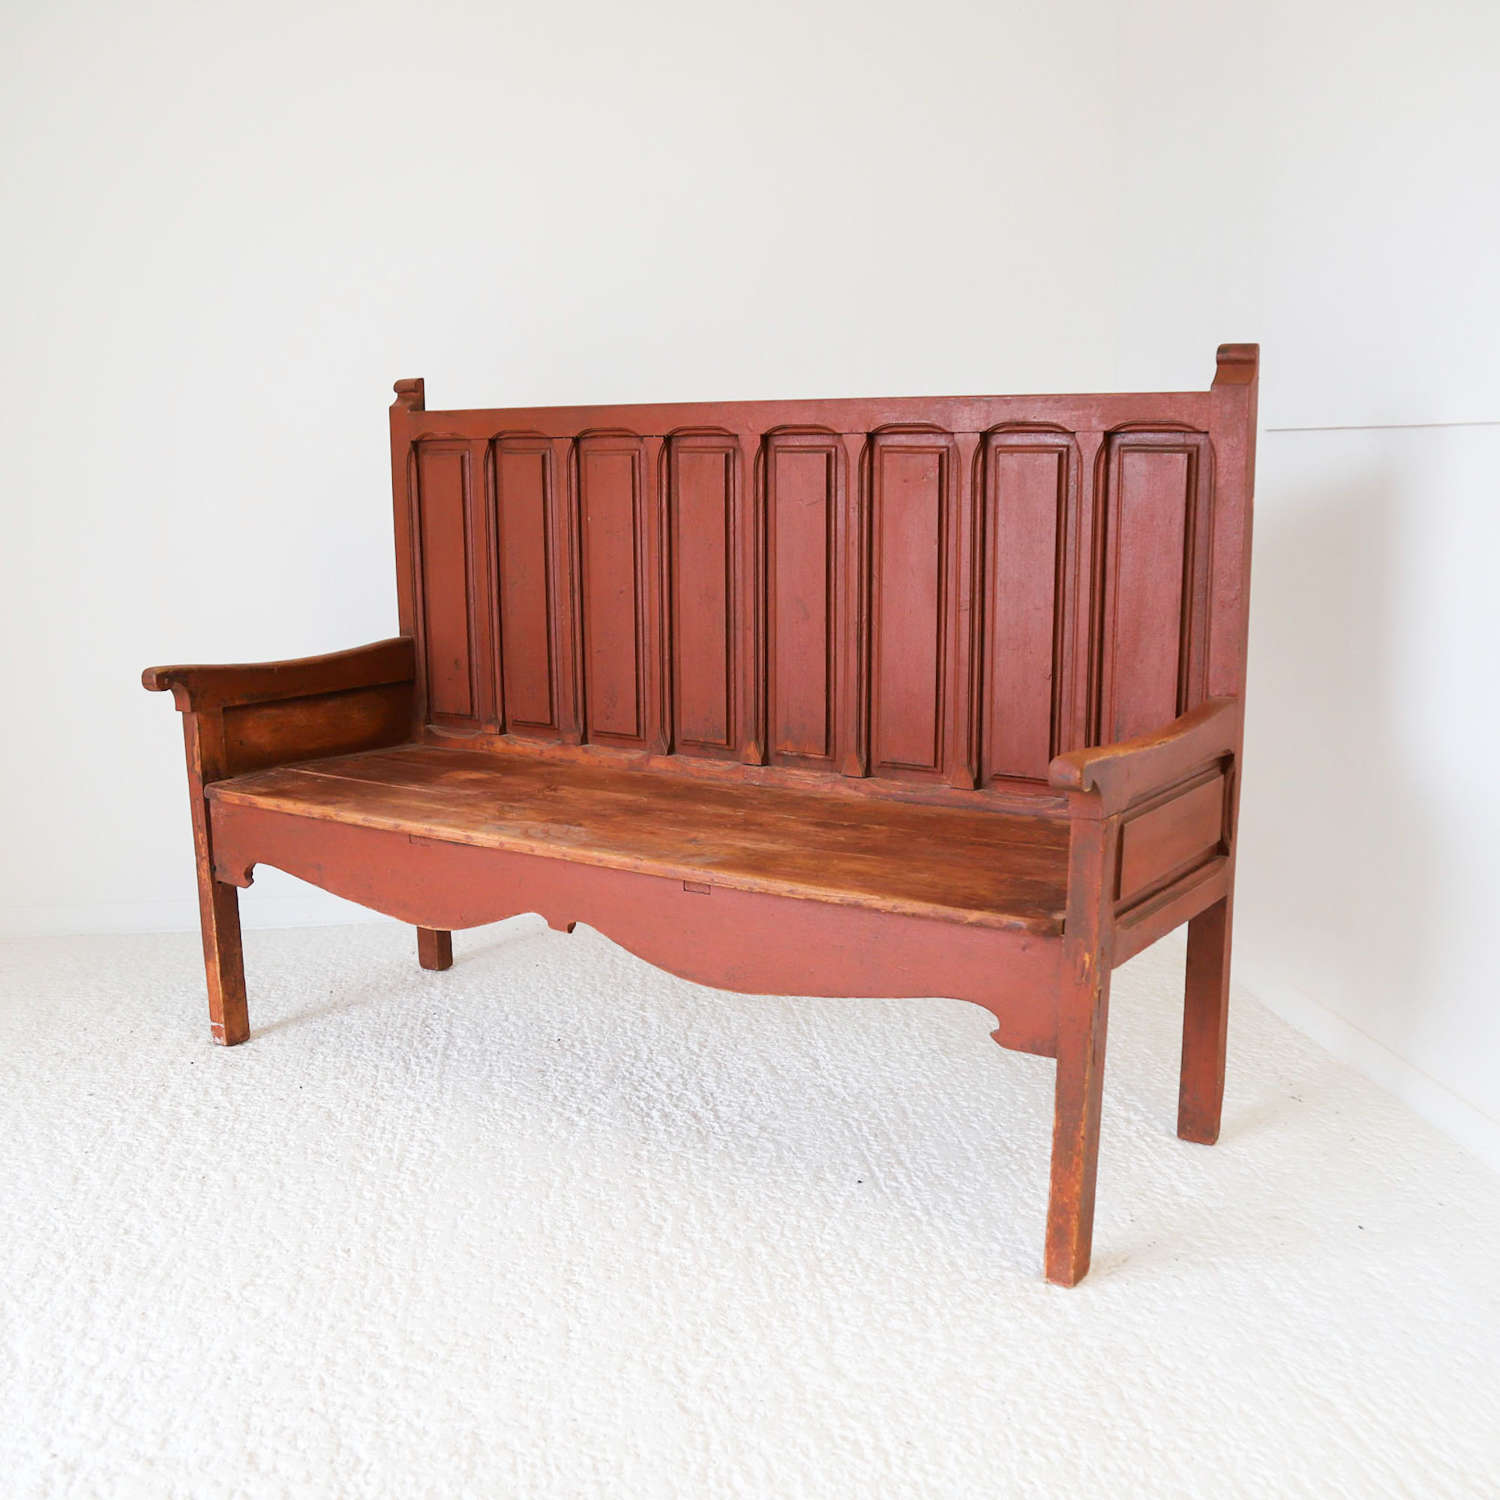 A Large Spanish Painted Settle Bench c.1890